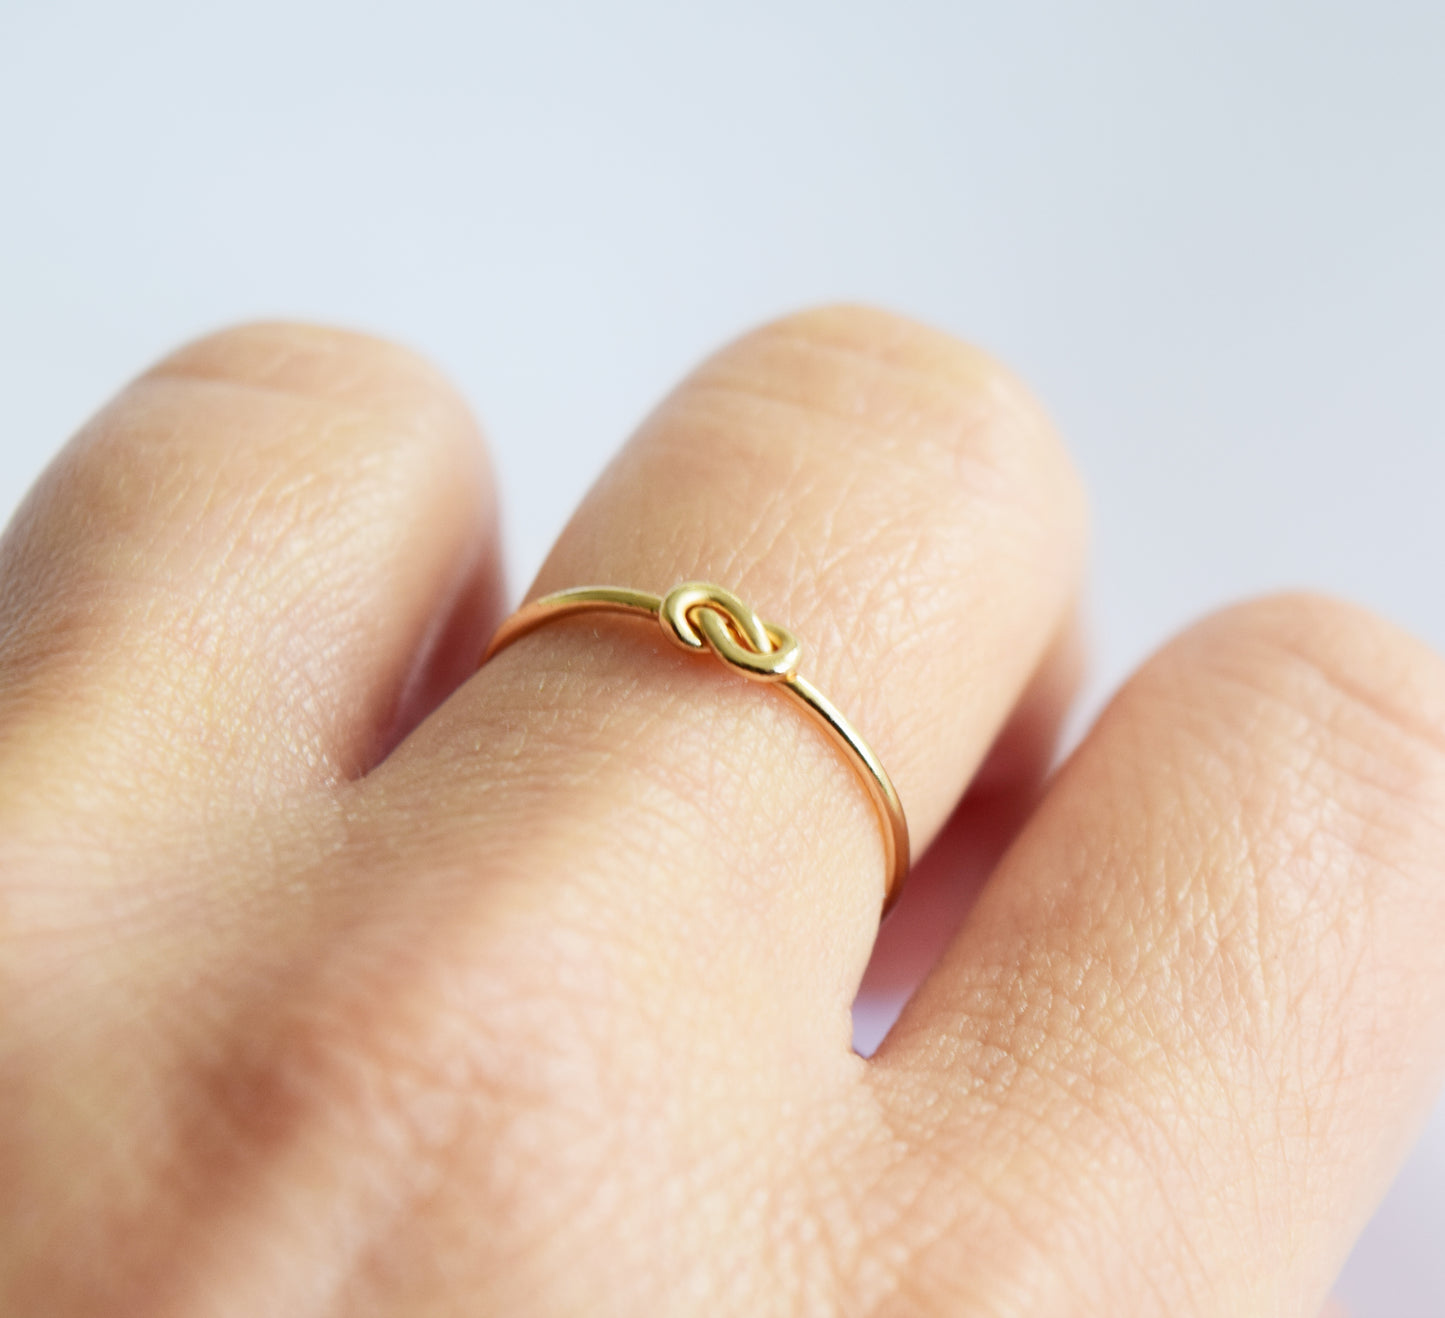 Knot Gold Ring